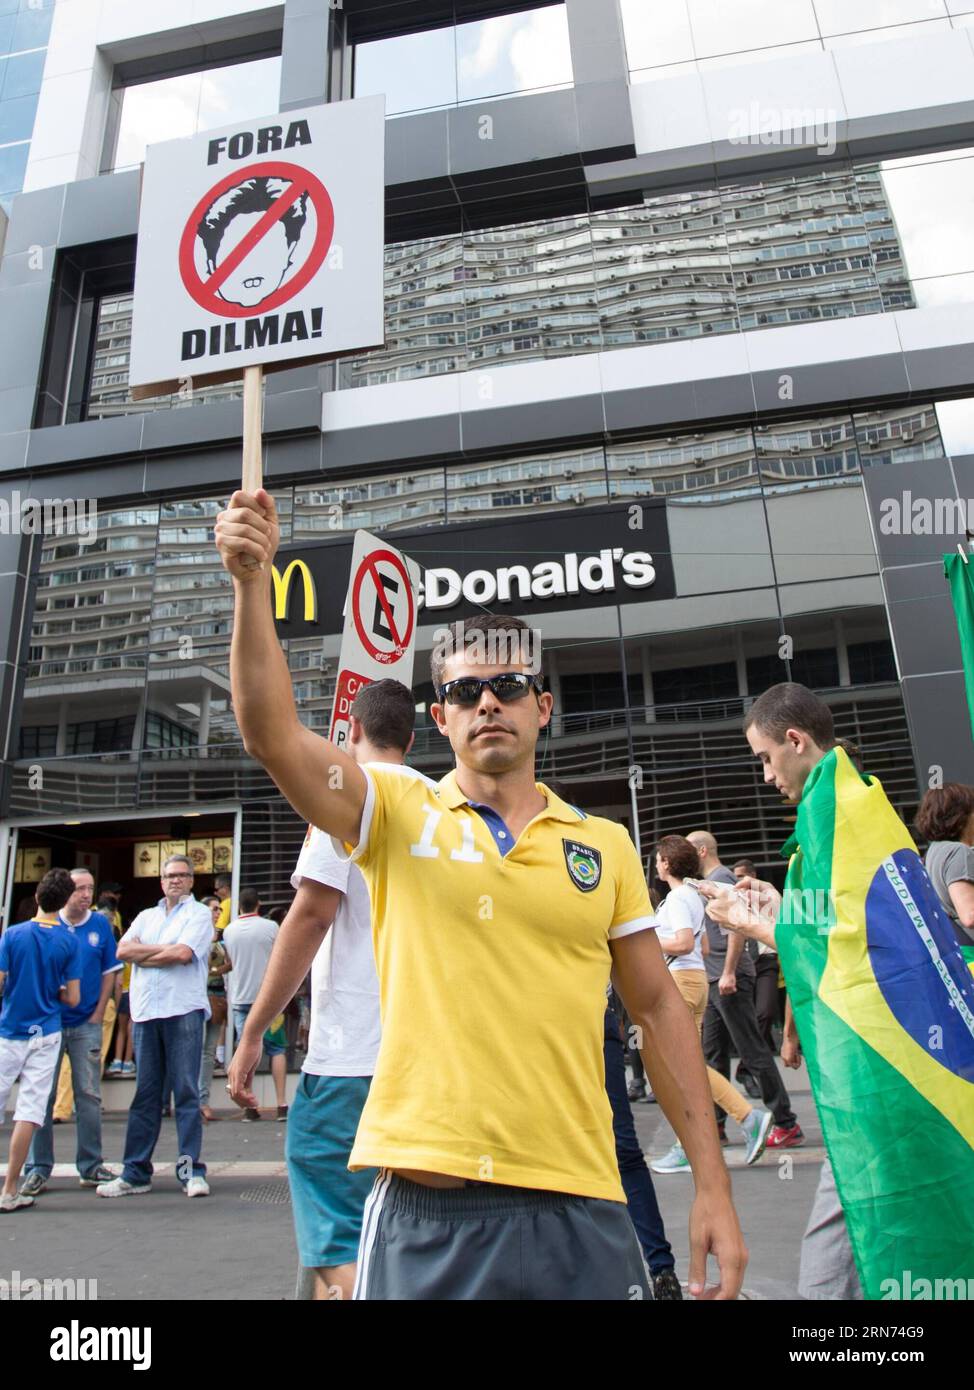 POLITIK Brasilianer protestieren gegen Präsidentin Rousseff A protester holds a cardboard with the slogan Dilma out during an anti-government demonstration in Sao Paulo, Brazil, Aug. 16, 2015. A demonstration took place on the Paulista Avenue in downtown Sao Paulo on Sunday with thousands of protesters marching with slogans on flags and cardboards. Support for Brazilian President Dilma Rousseff has fallen to eight percent in a recent poll as she was accused of failing to curb corruption and the slump of economy. ) BRAZIL-SAO PAULO-SOCIETY-DEMONSTRATION XuxZijian PUBLICATIONxNOTxINxCHN   politi Stock Photo